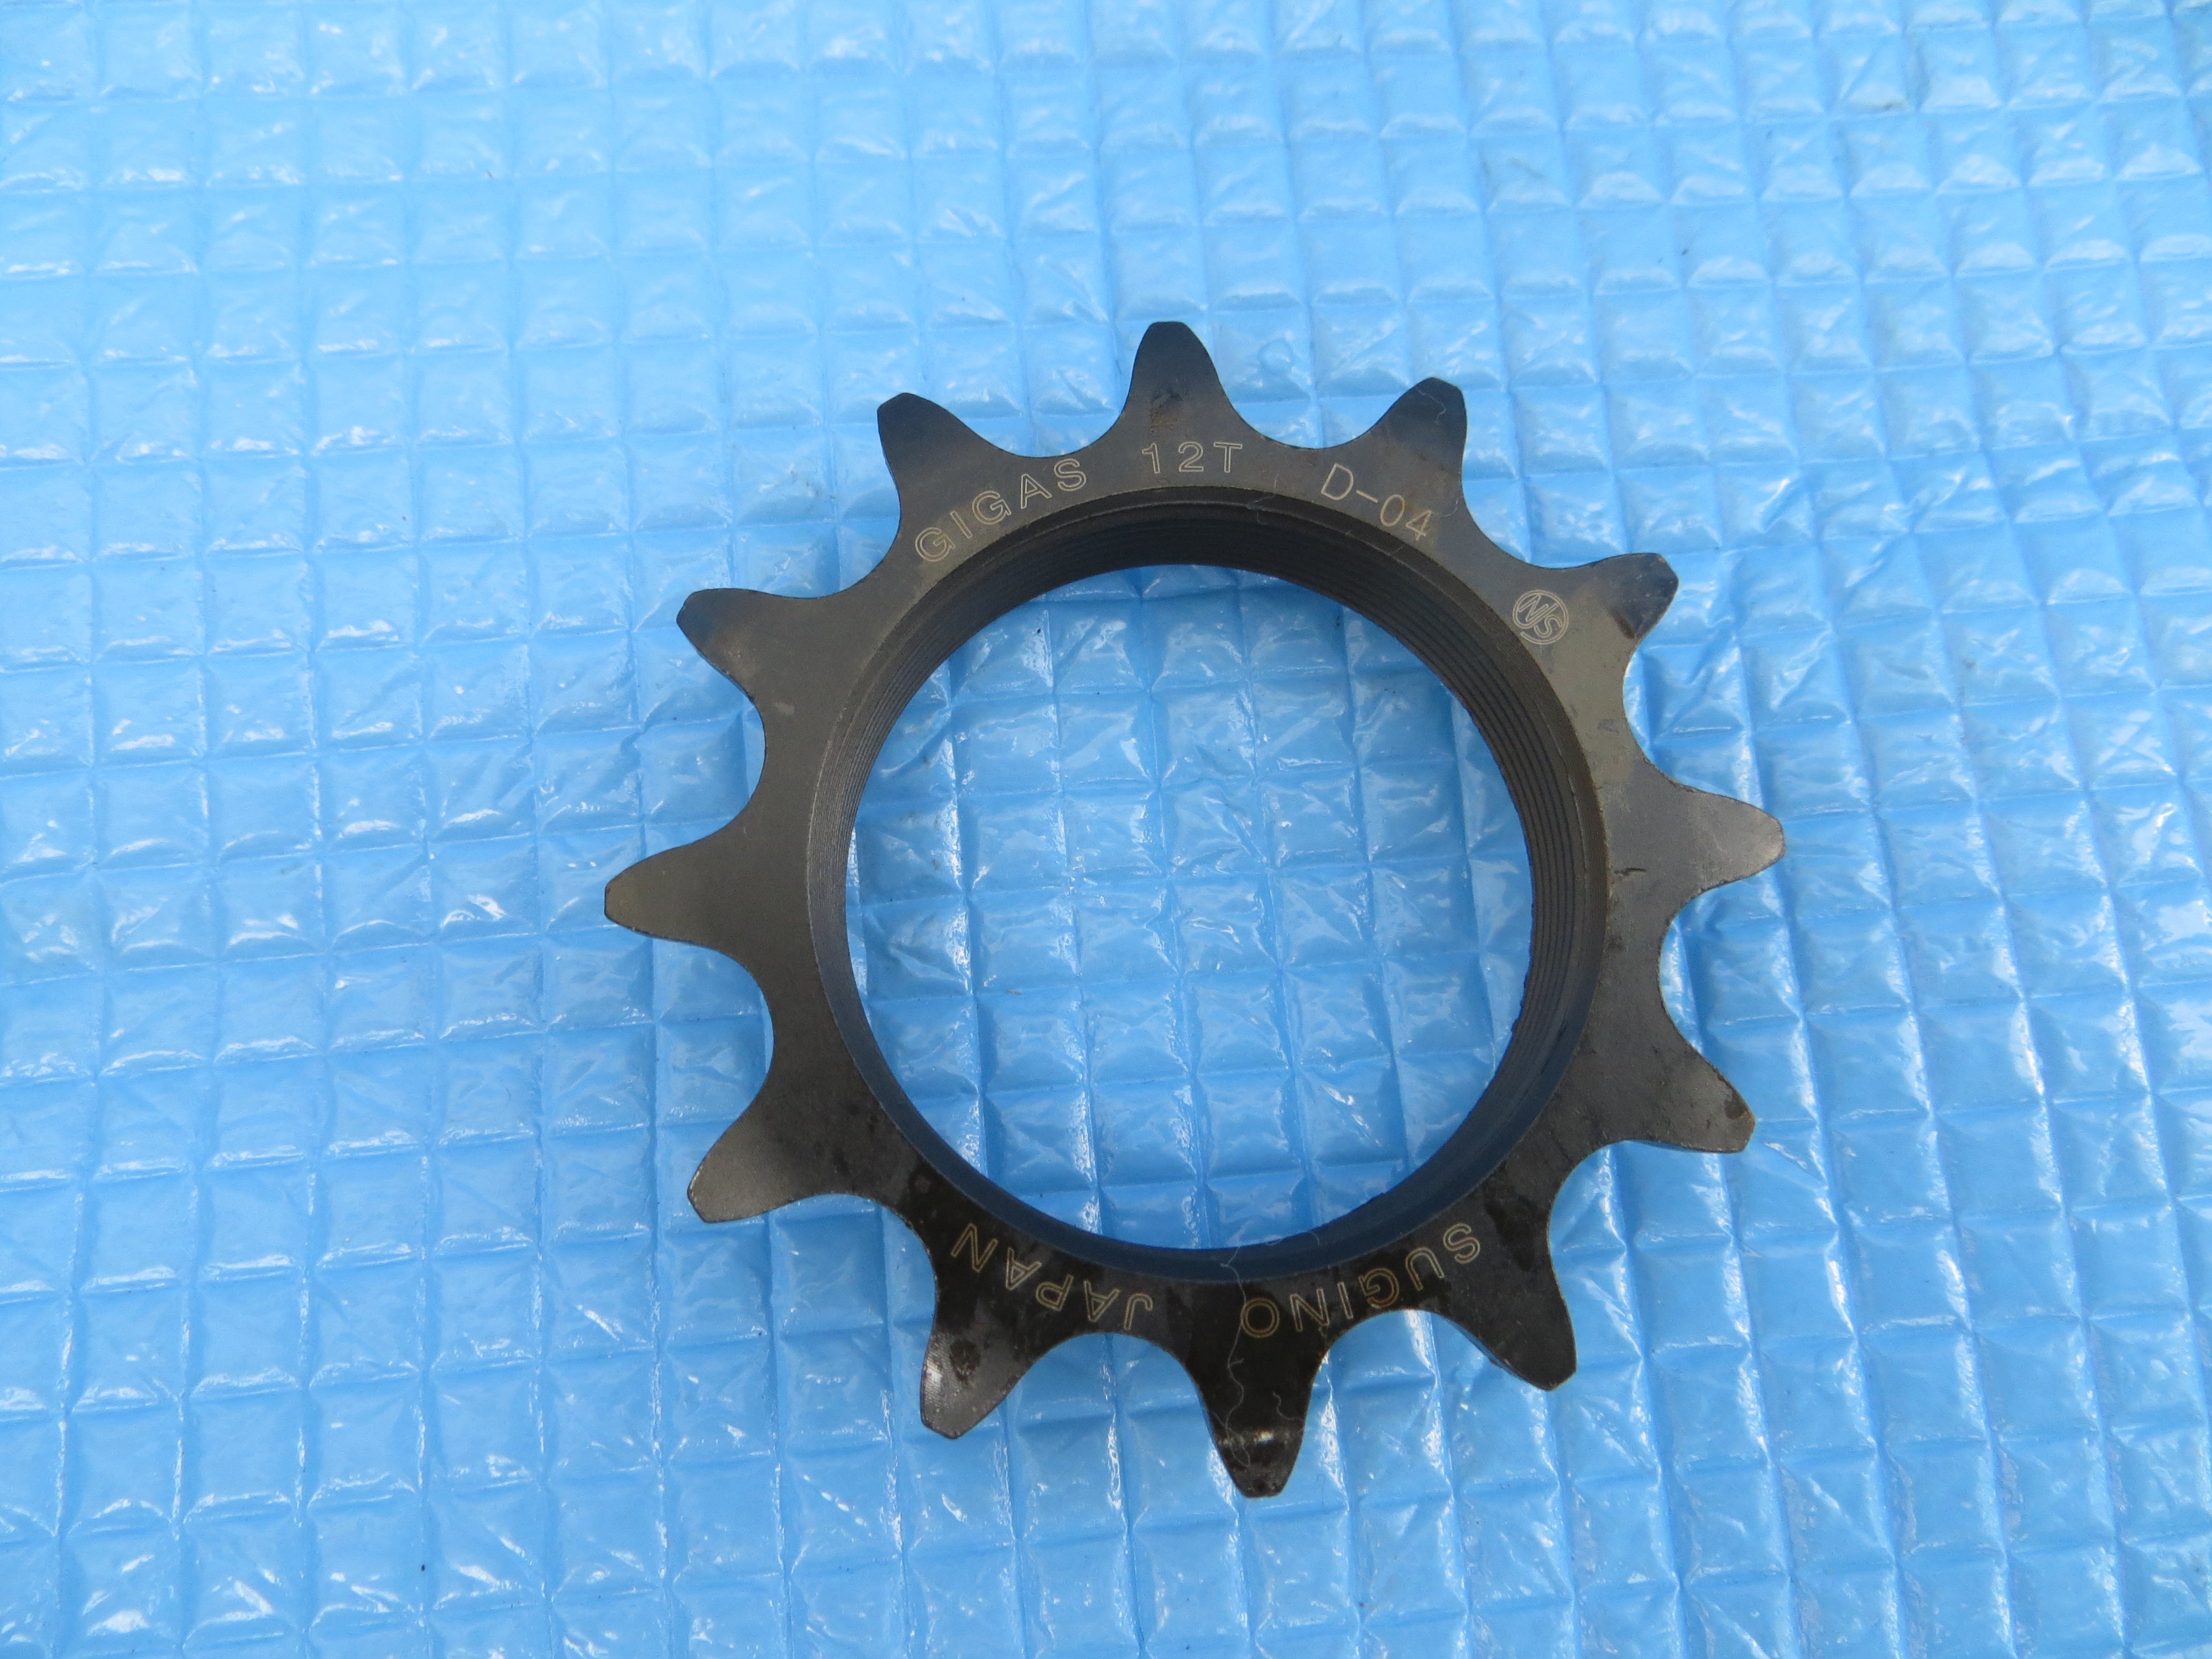 Never Used Sugino Gigas 12t 1/8” Track Cog NJS (23041601)